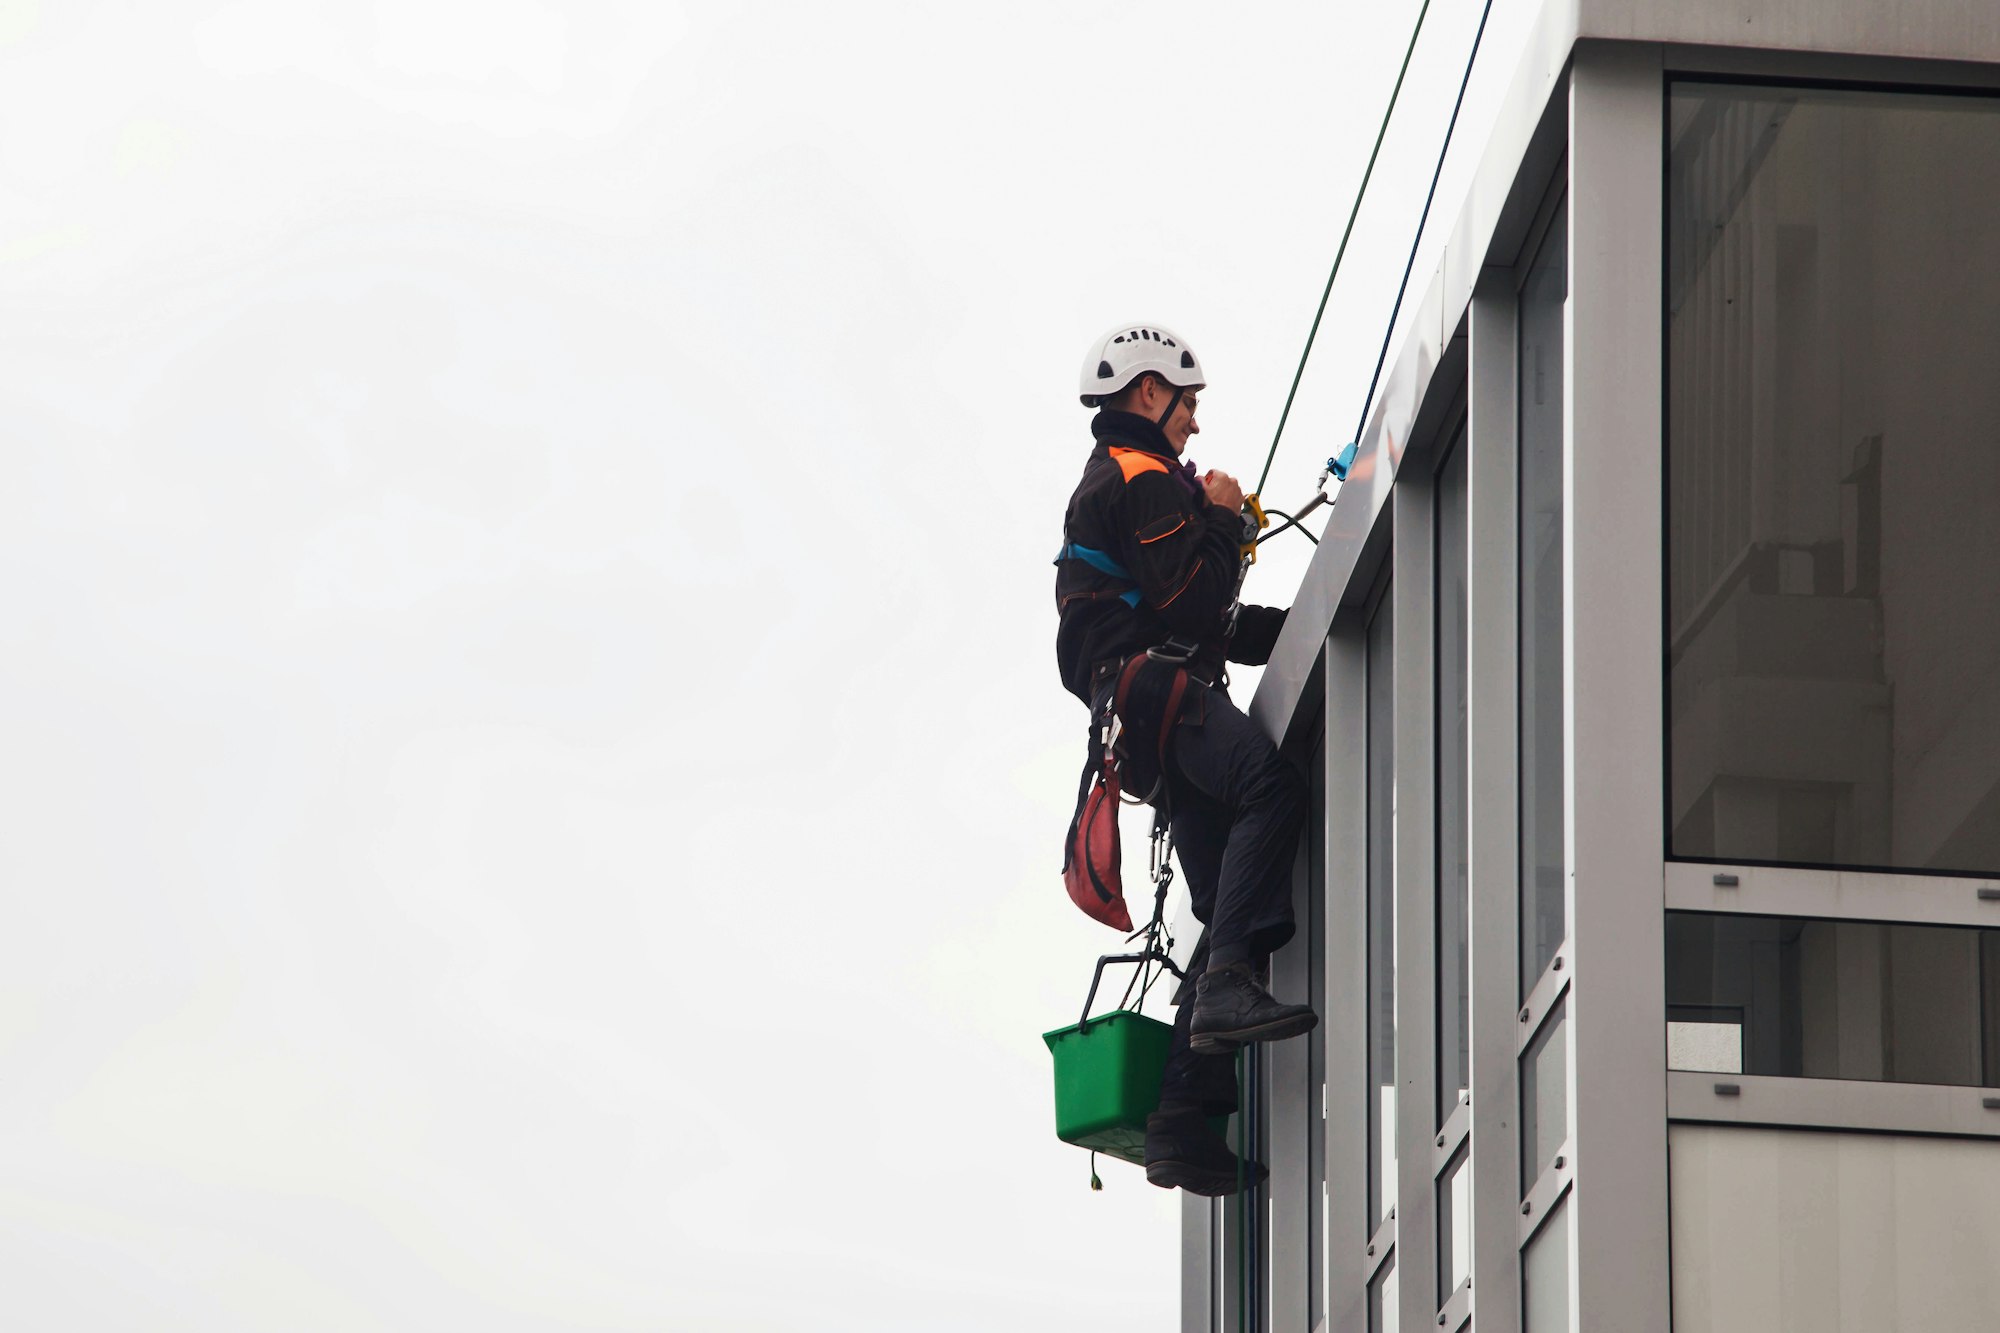 Industrial mountaineering worker hangs over residential building while washing exterior facade